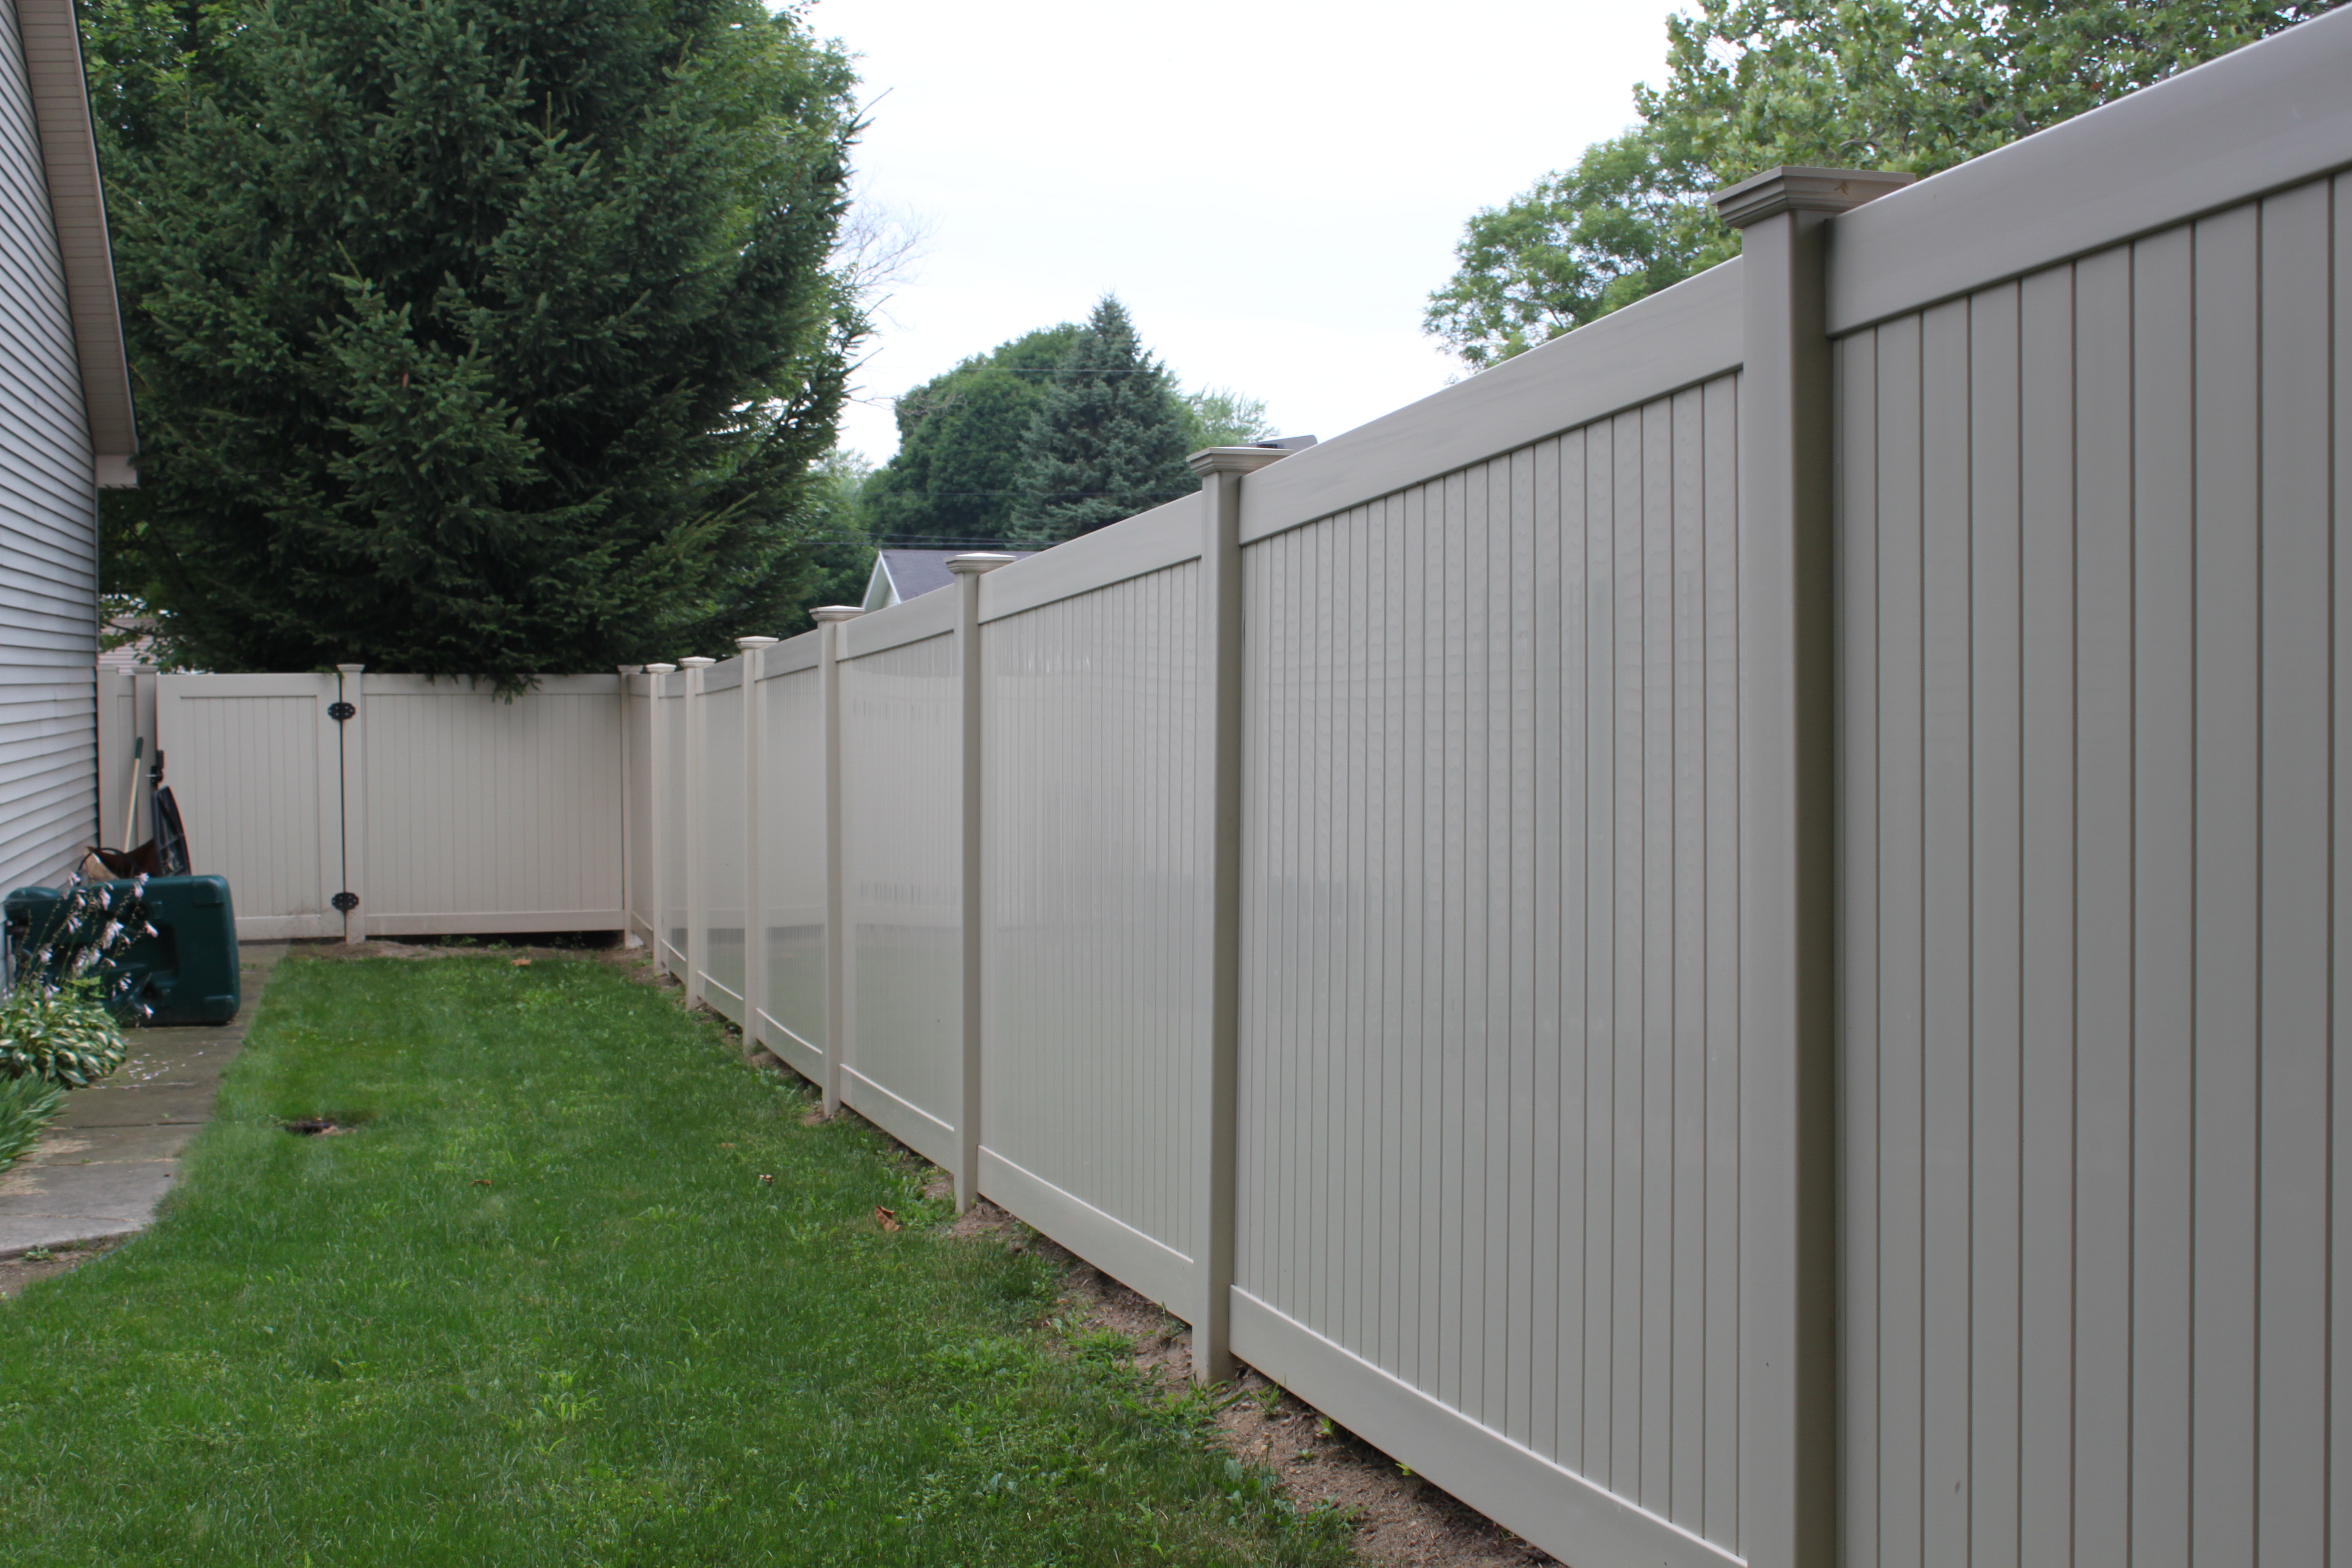 privacy fencing evolutions privacy fence evolutions ... NNFZWSZ